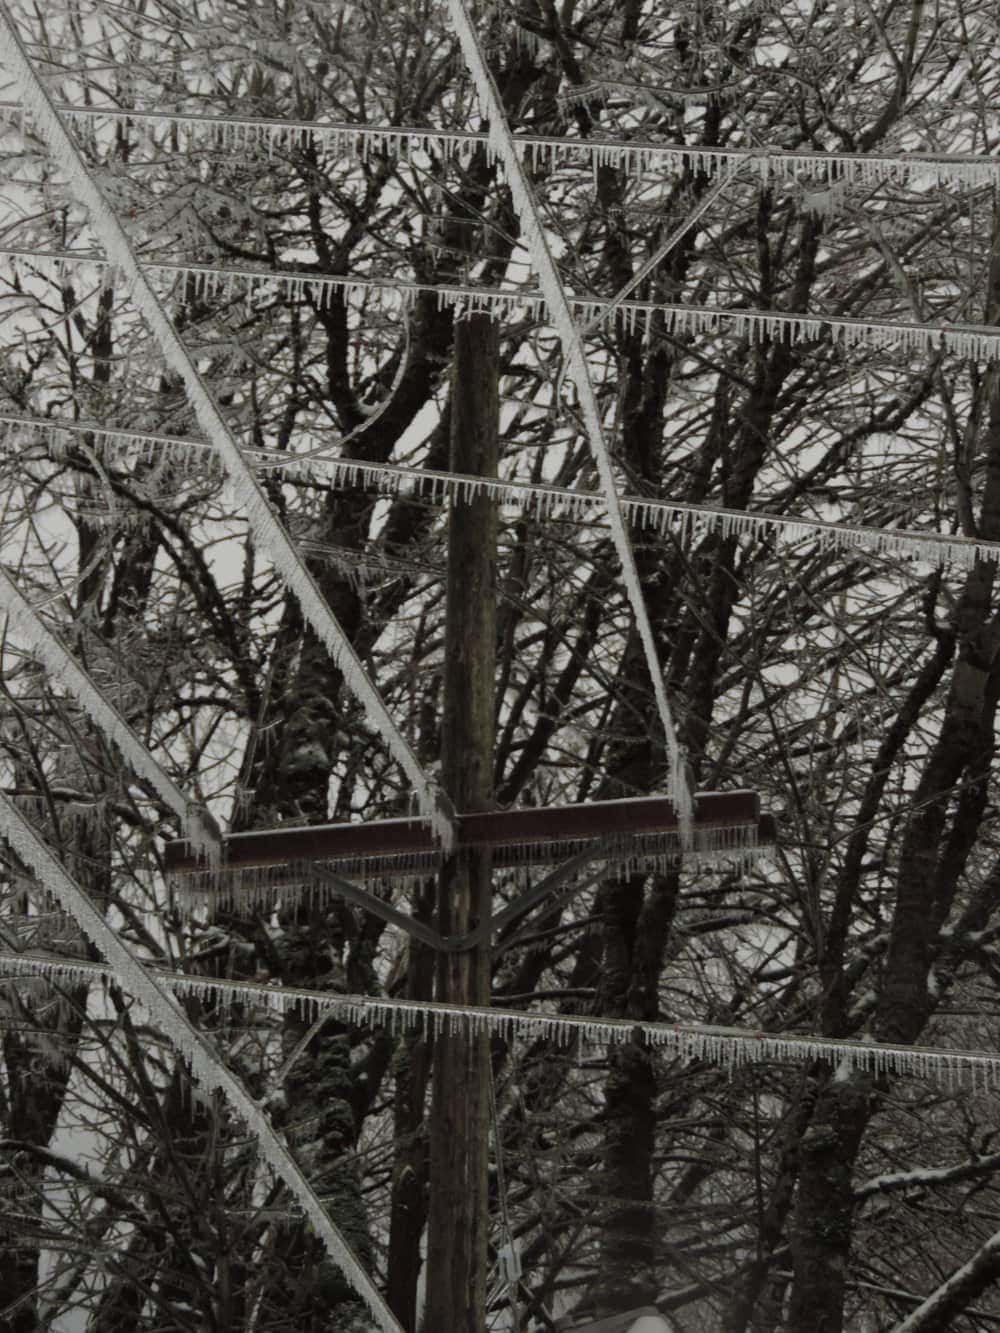 Ice clinging to power lines at the camp. Photo: Bill Gerber